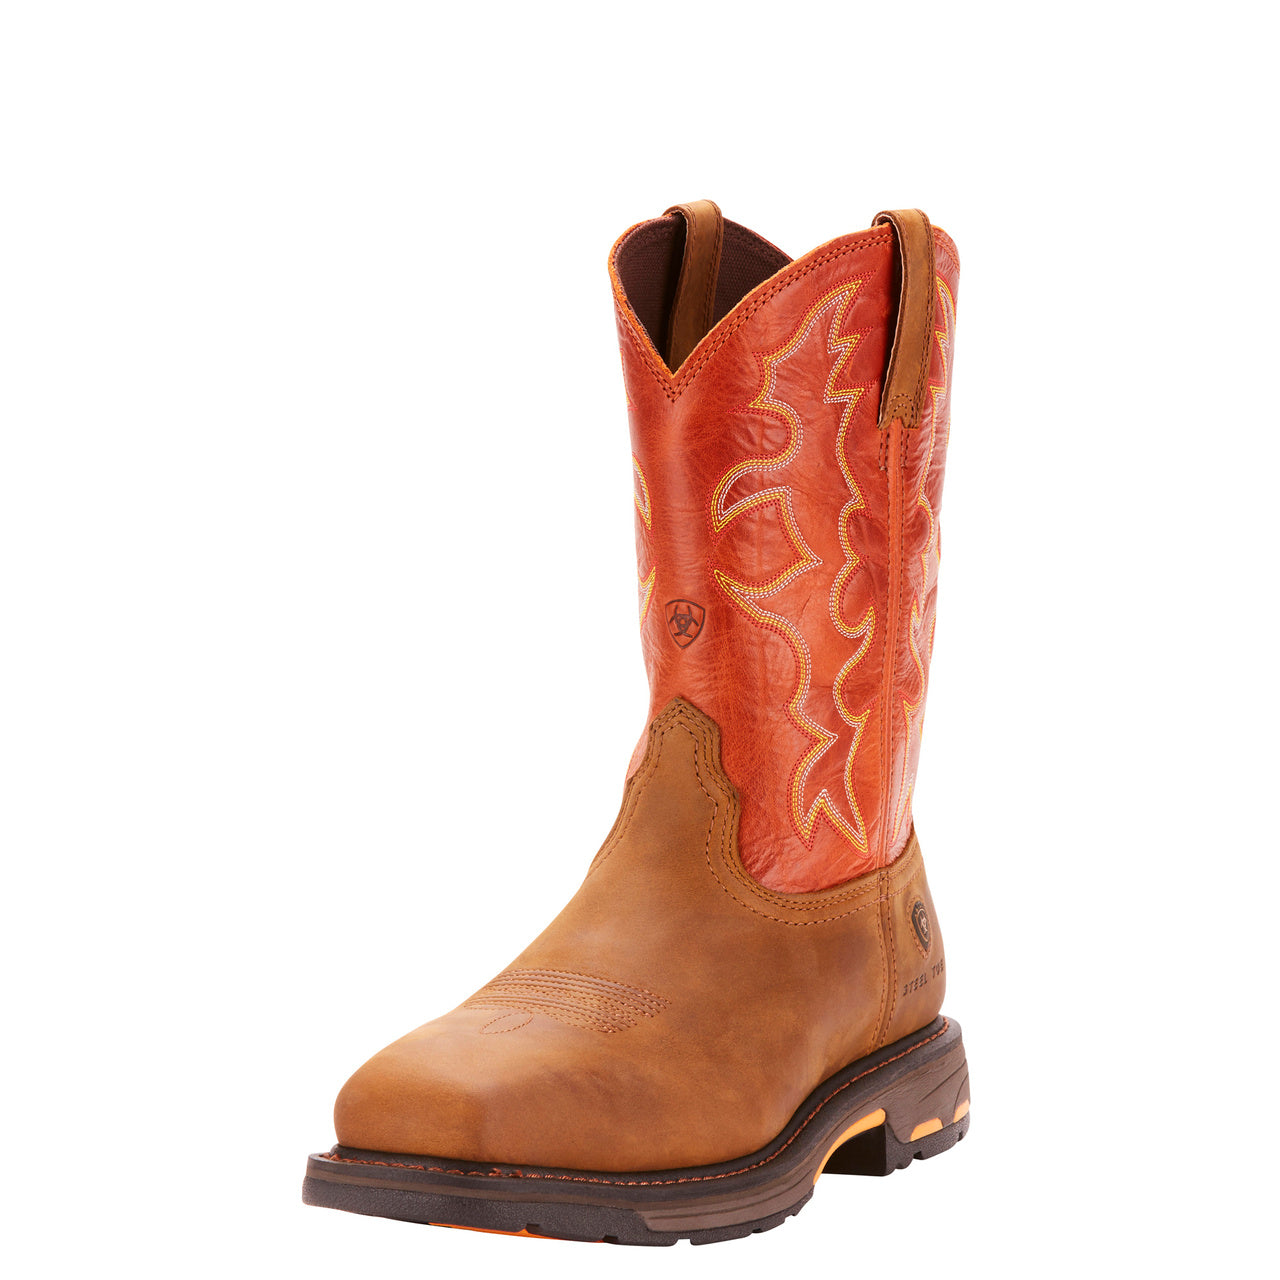 Ariat Workhog Wide Square Toe Boot 10 EE